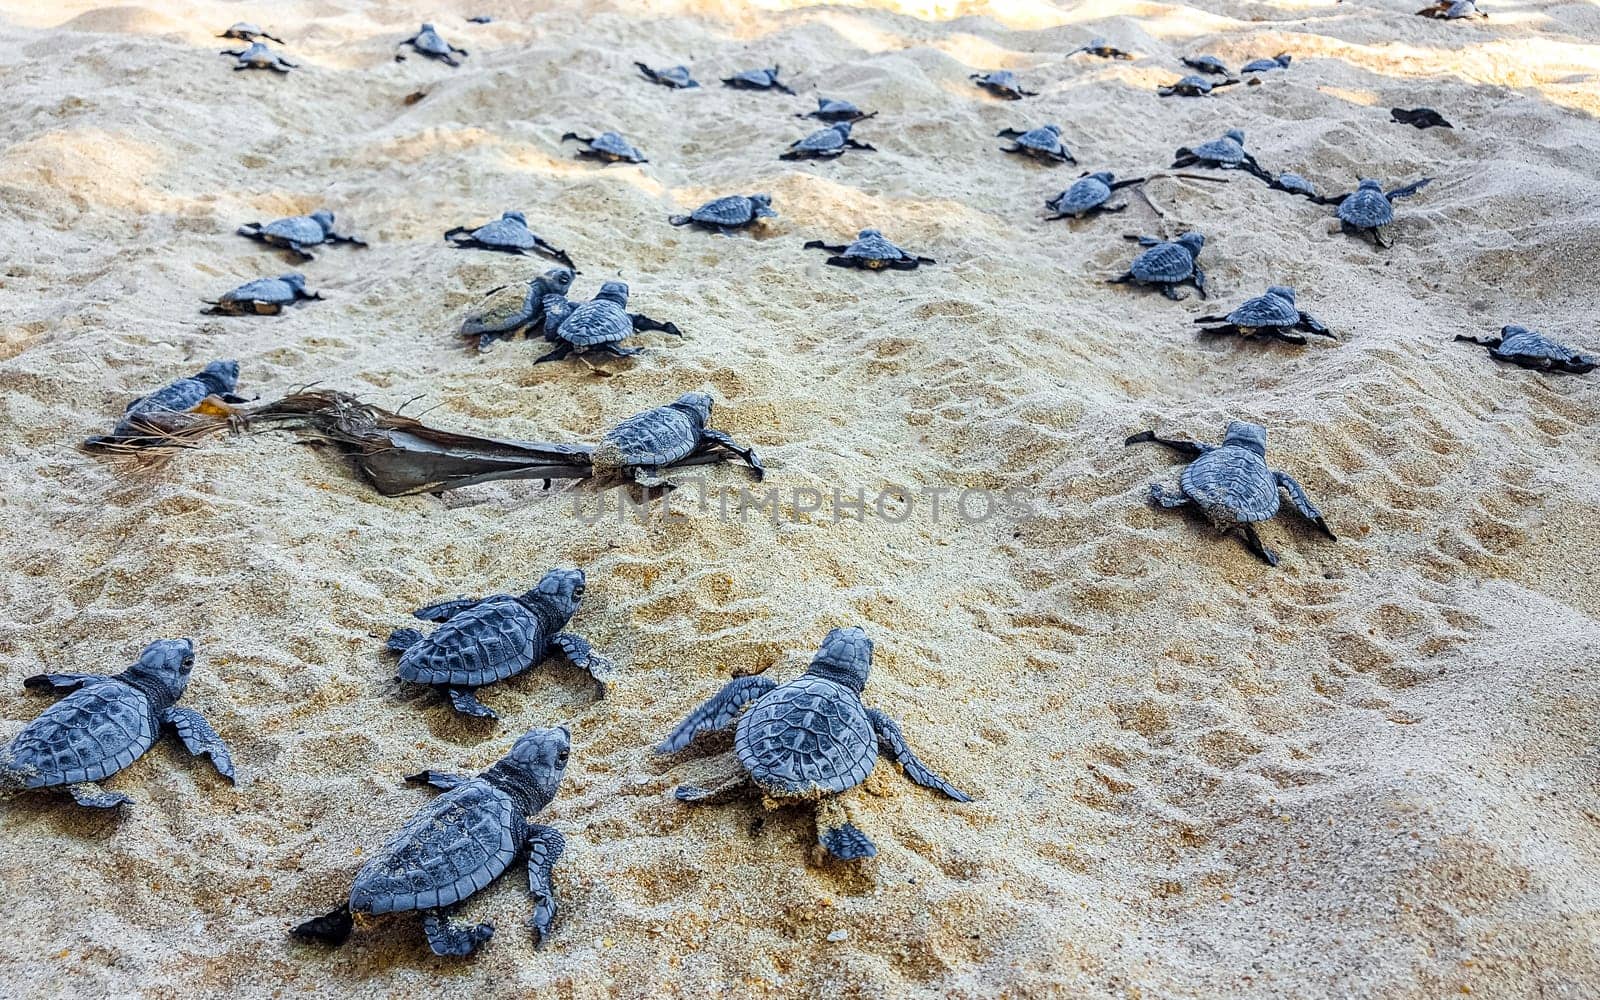 Many small baby turtles crawl out of the sand nest to the sea in Mirissa Beach Matara District Southern Province Sri Lanka.